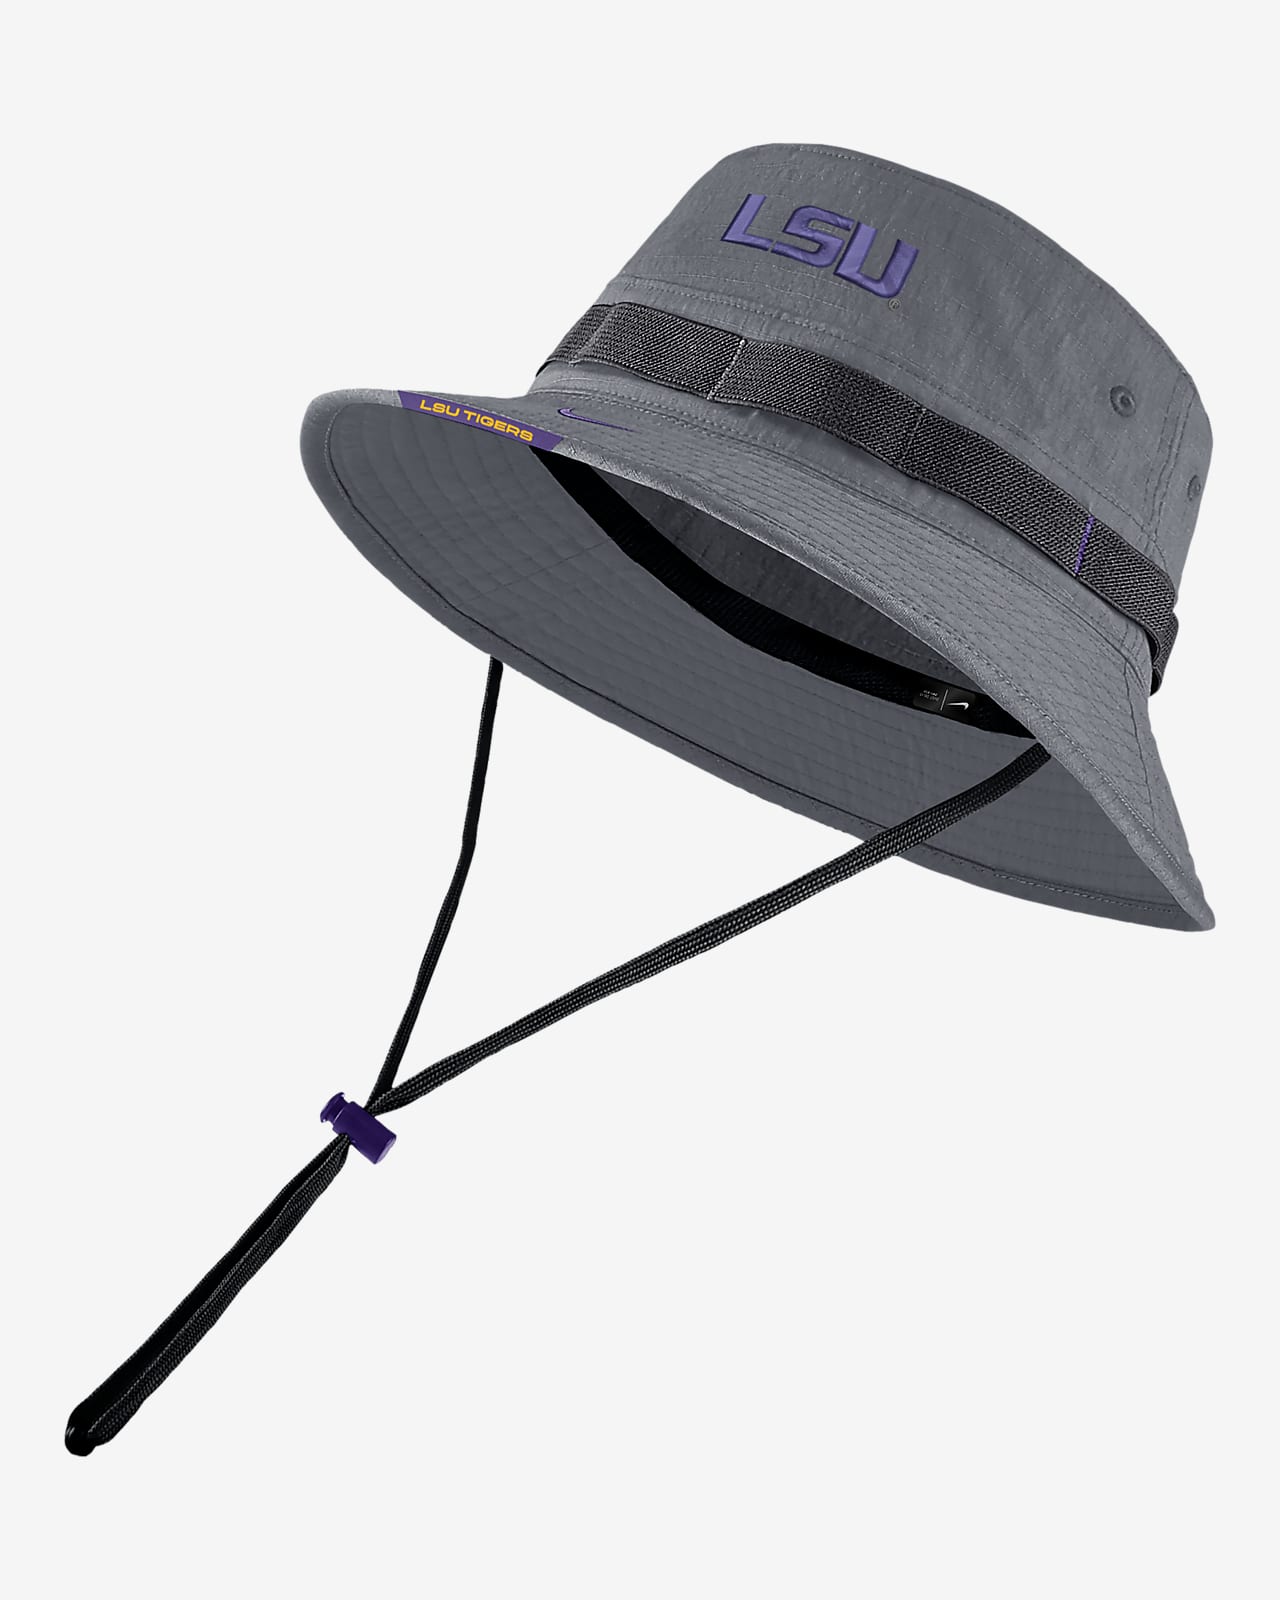 https://static.nike.com/a/images/t_PDP_1280_v1/f_auto,q_auto:eco/e338be8c-156a-4d24-8a3b-6fdf4ec992e8/lsuboonie-bucket-hat-0wMhJf.png